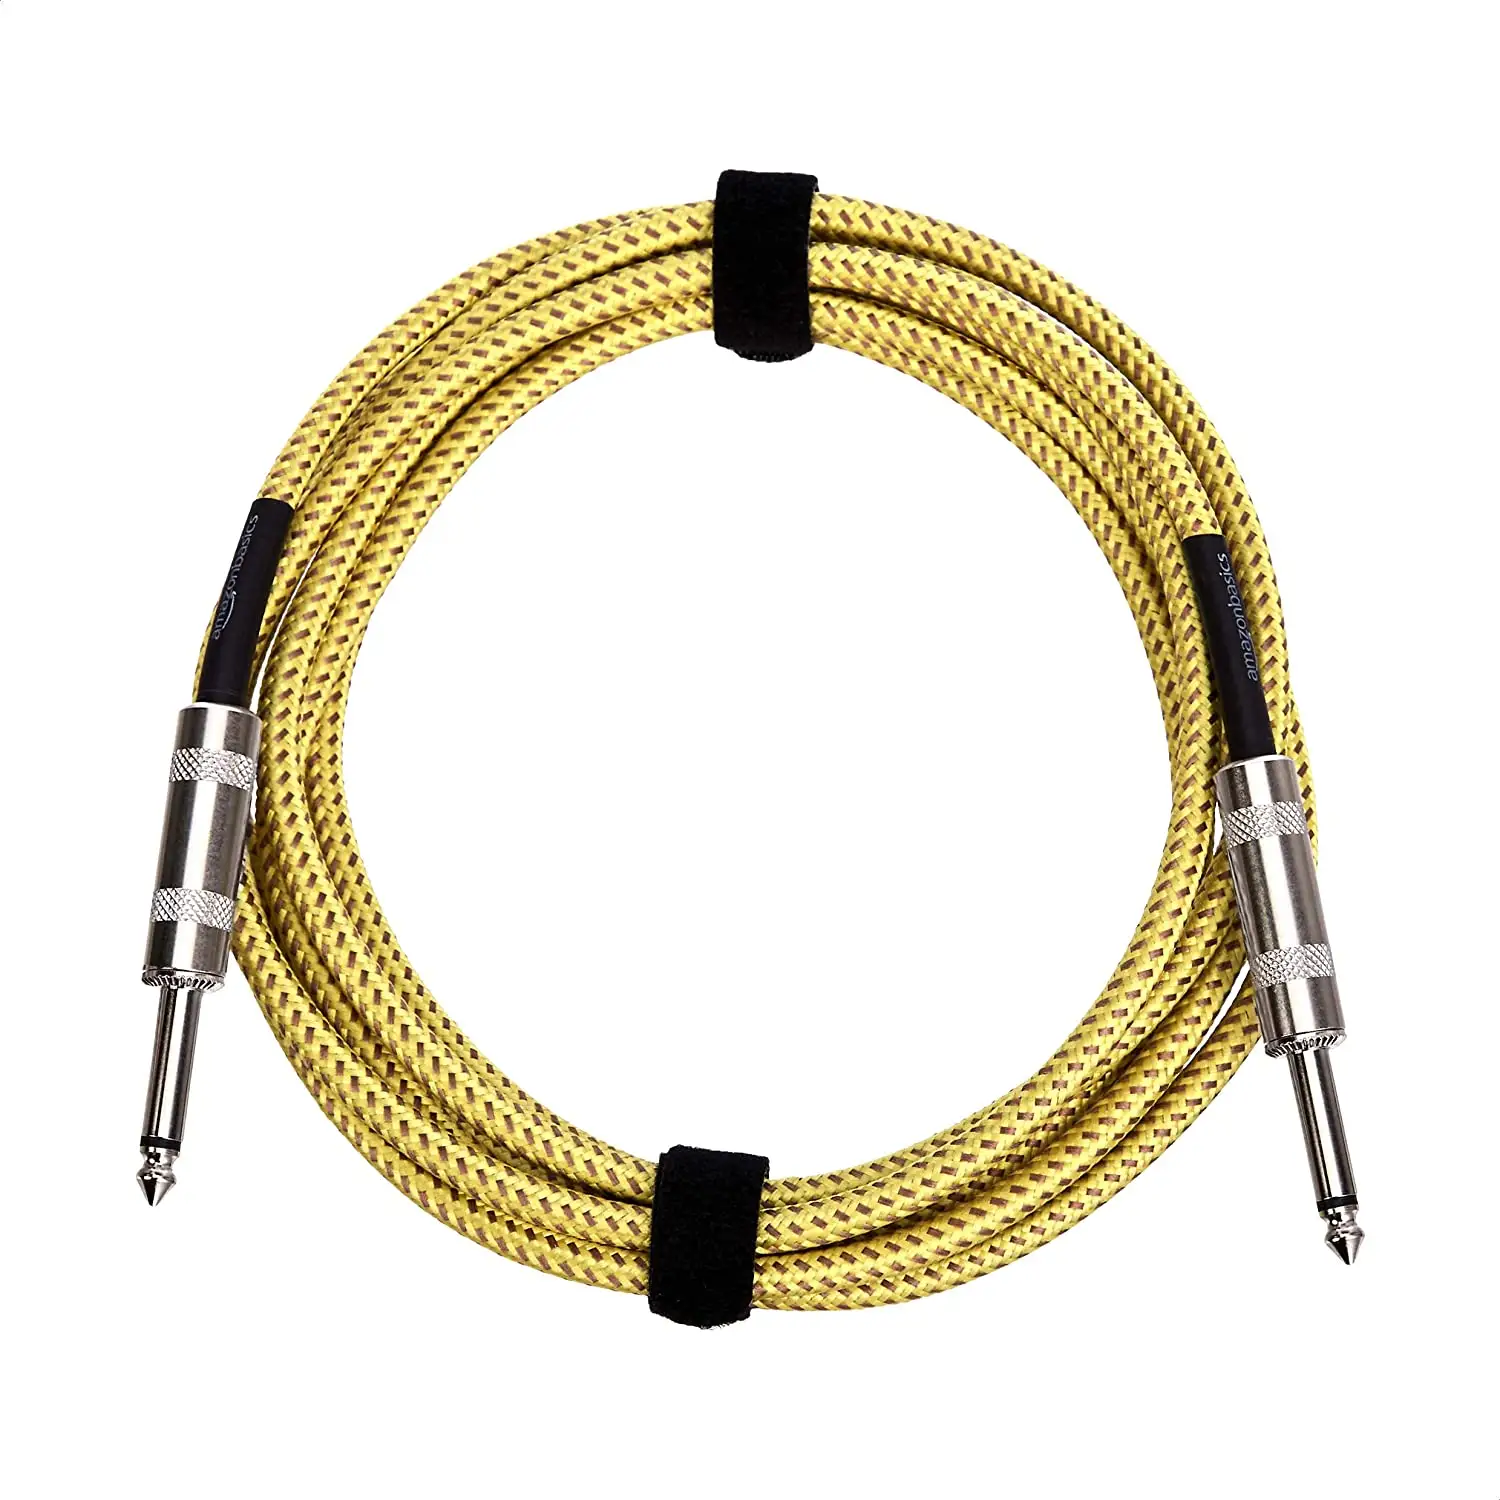 Professional Musical Instrument Guitar Cable Low Noise Braid Noiseless Guitar Cable Guitar Cable